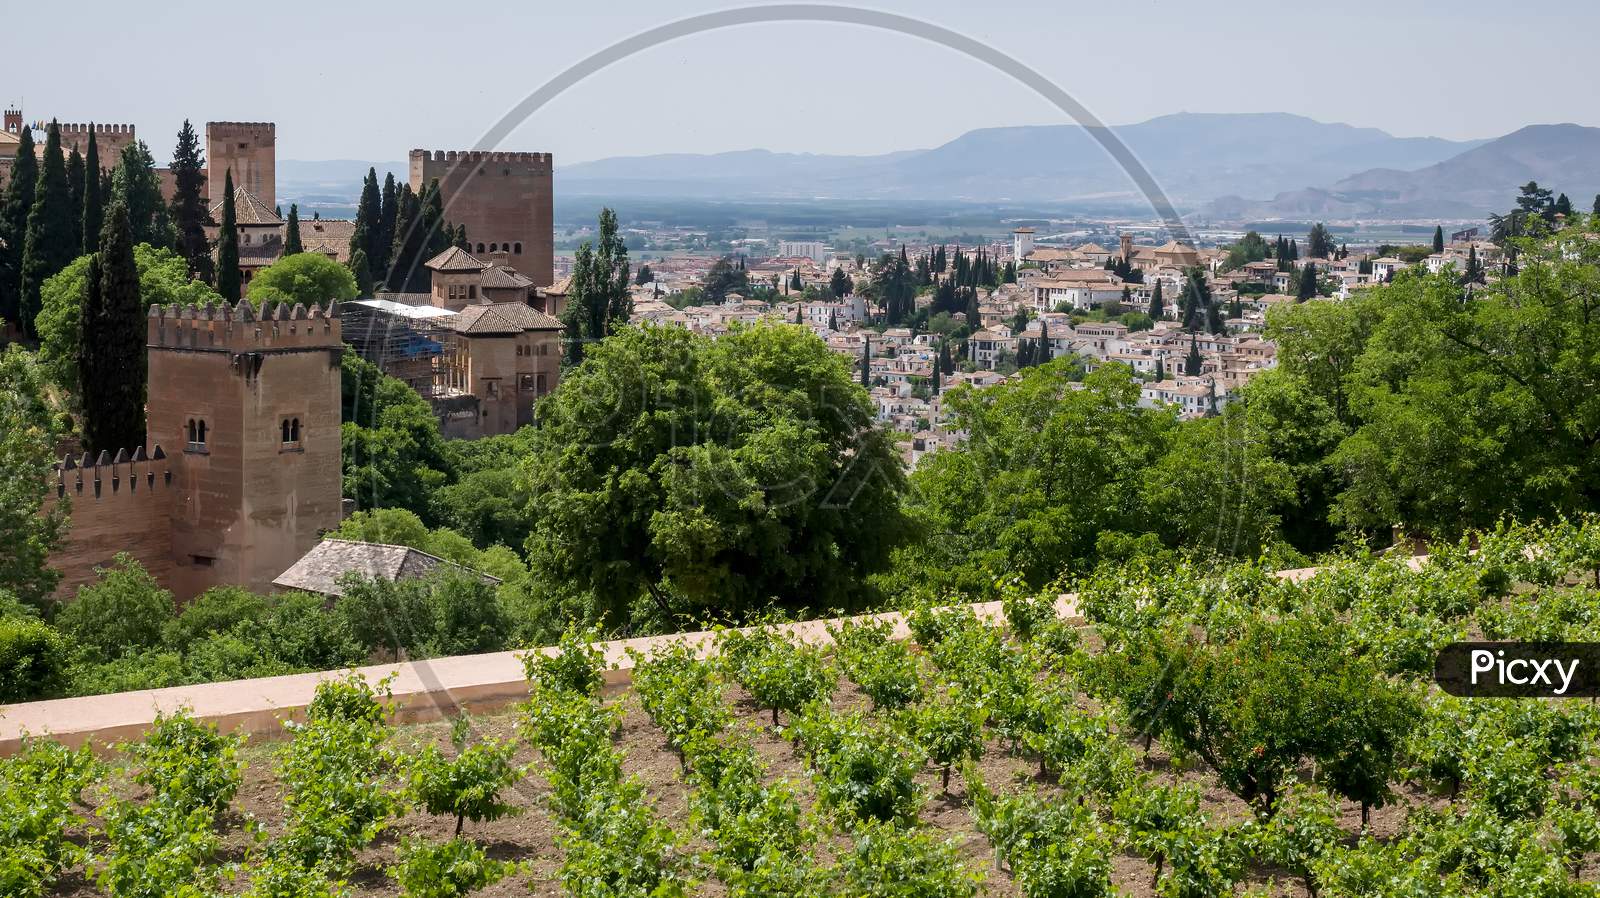 Granada, Andalucia/Spain - May 7 : View From The Alhambra Palace Gardens In Granada Andalucia Spain On May 7, 2014